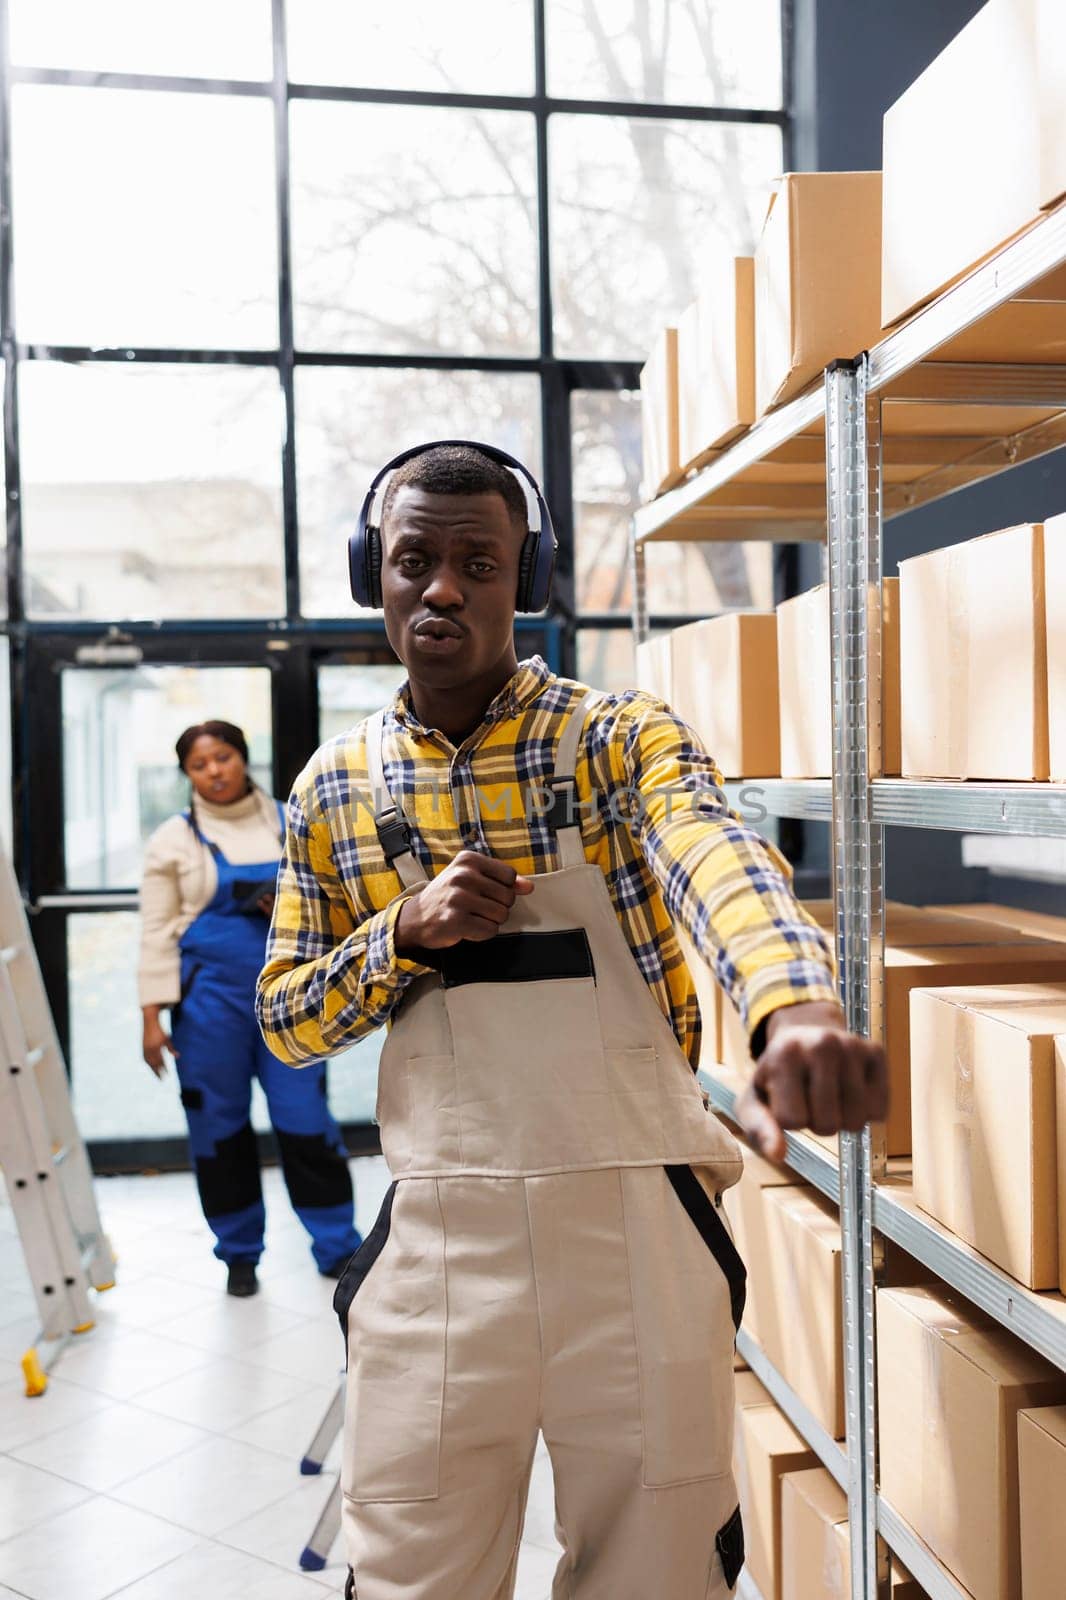 Warehouse package handler dancing at work and looking at camera. African american storehouse worker listening to playlist in headphones, singing along and making arms movements portrait